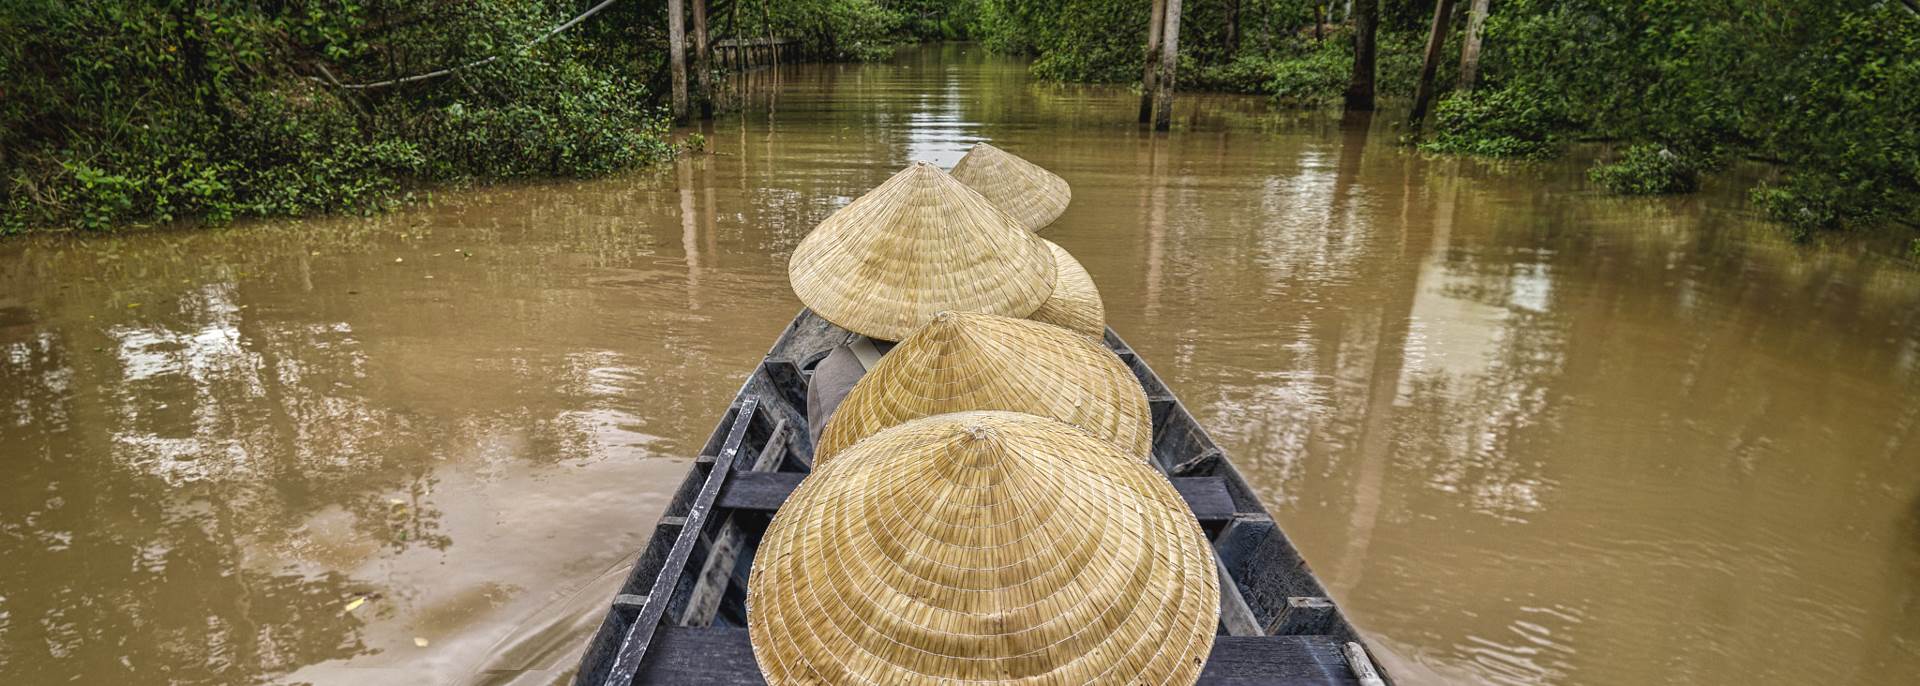 Mekong Delta 2 days Tour from Ho Chi Minh ( Cai Be - Can Tho )